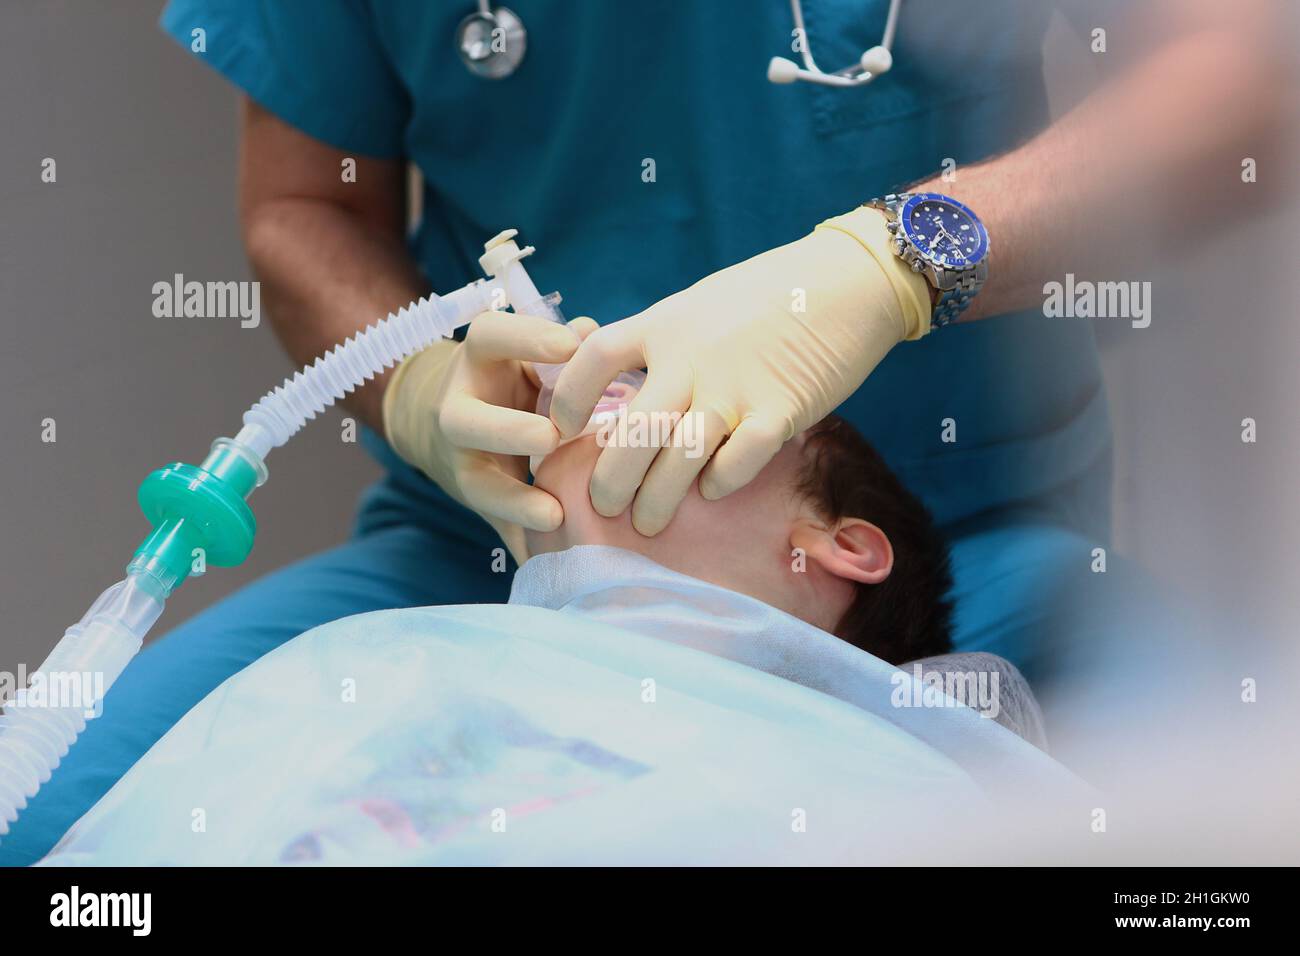 The anesthesiologist takes the child out of anesthesia. The end of the operation. Concept of health care and life saving. Copy space. An unrecognizabl Stock Photo